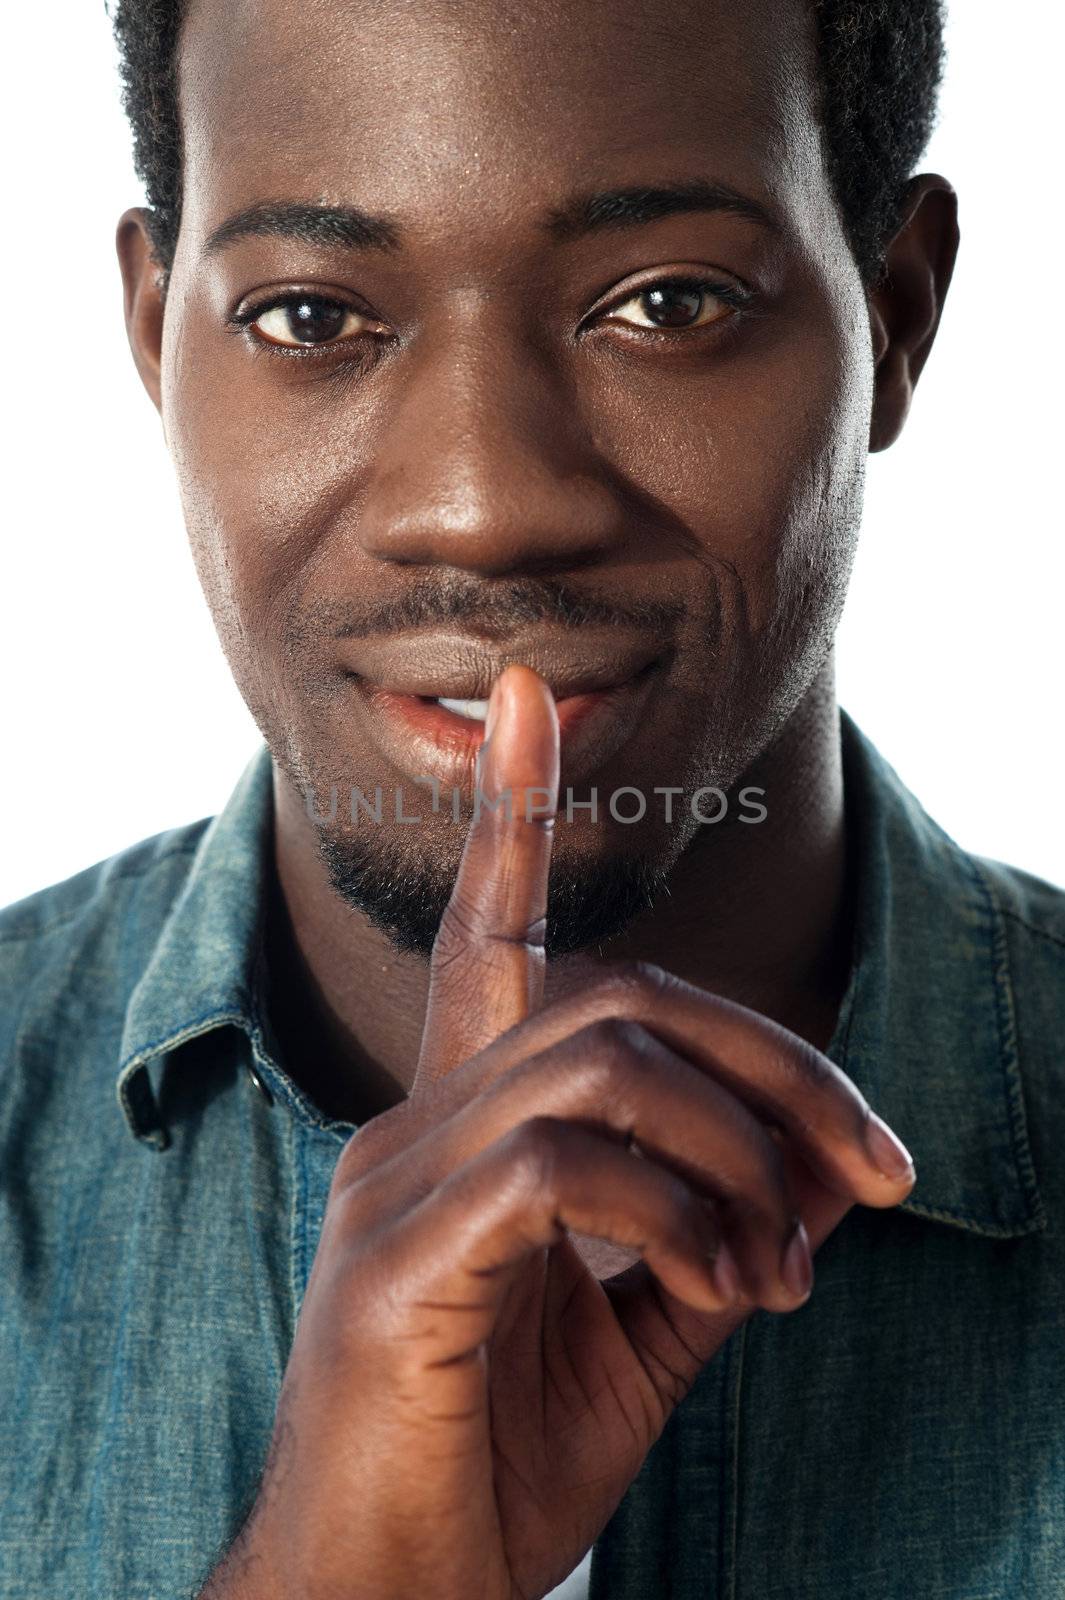 Silence gesture by a young guy, closeup view by stockyimages